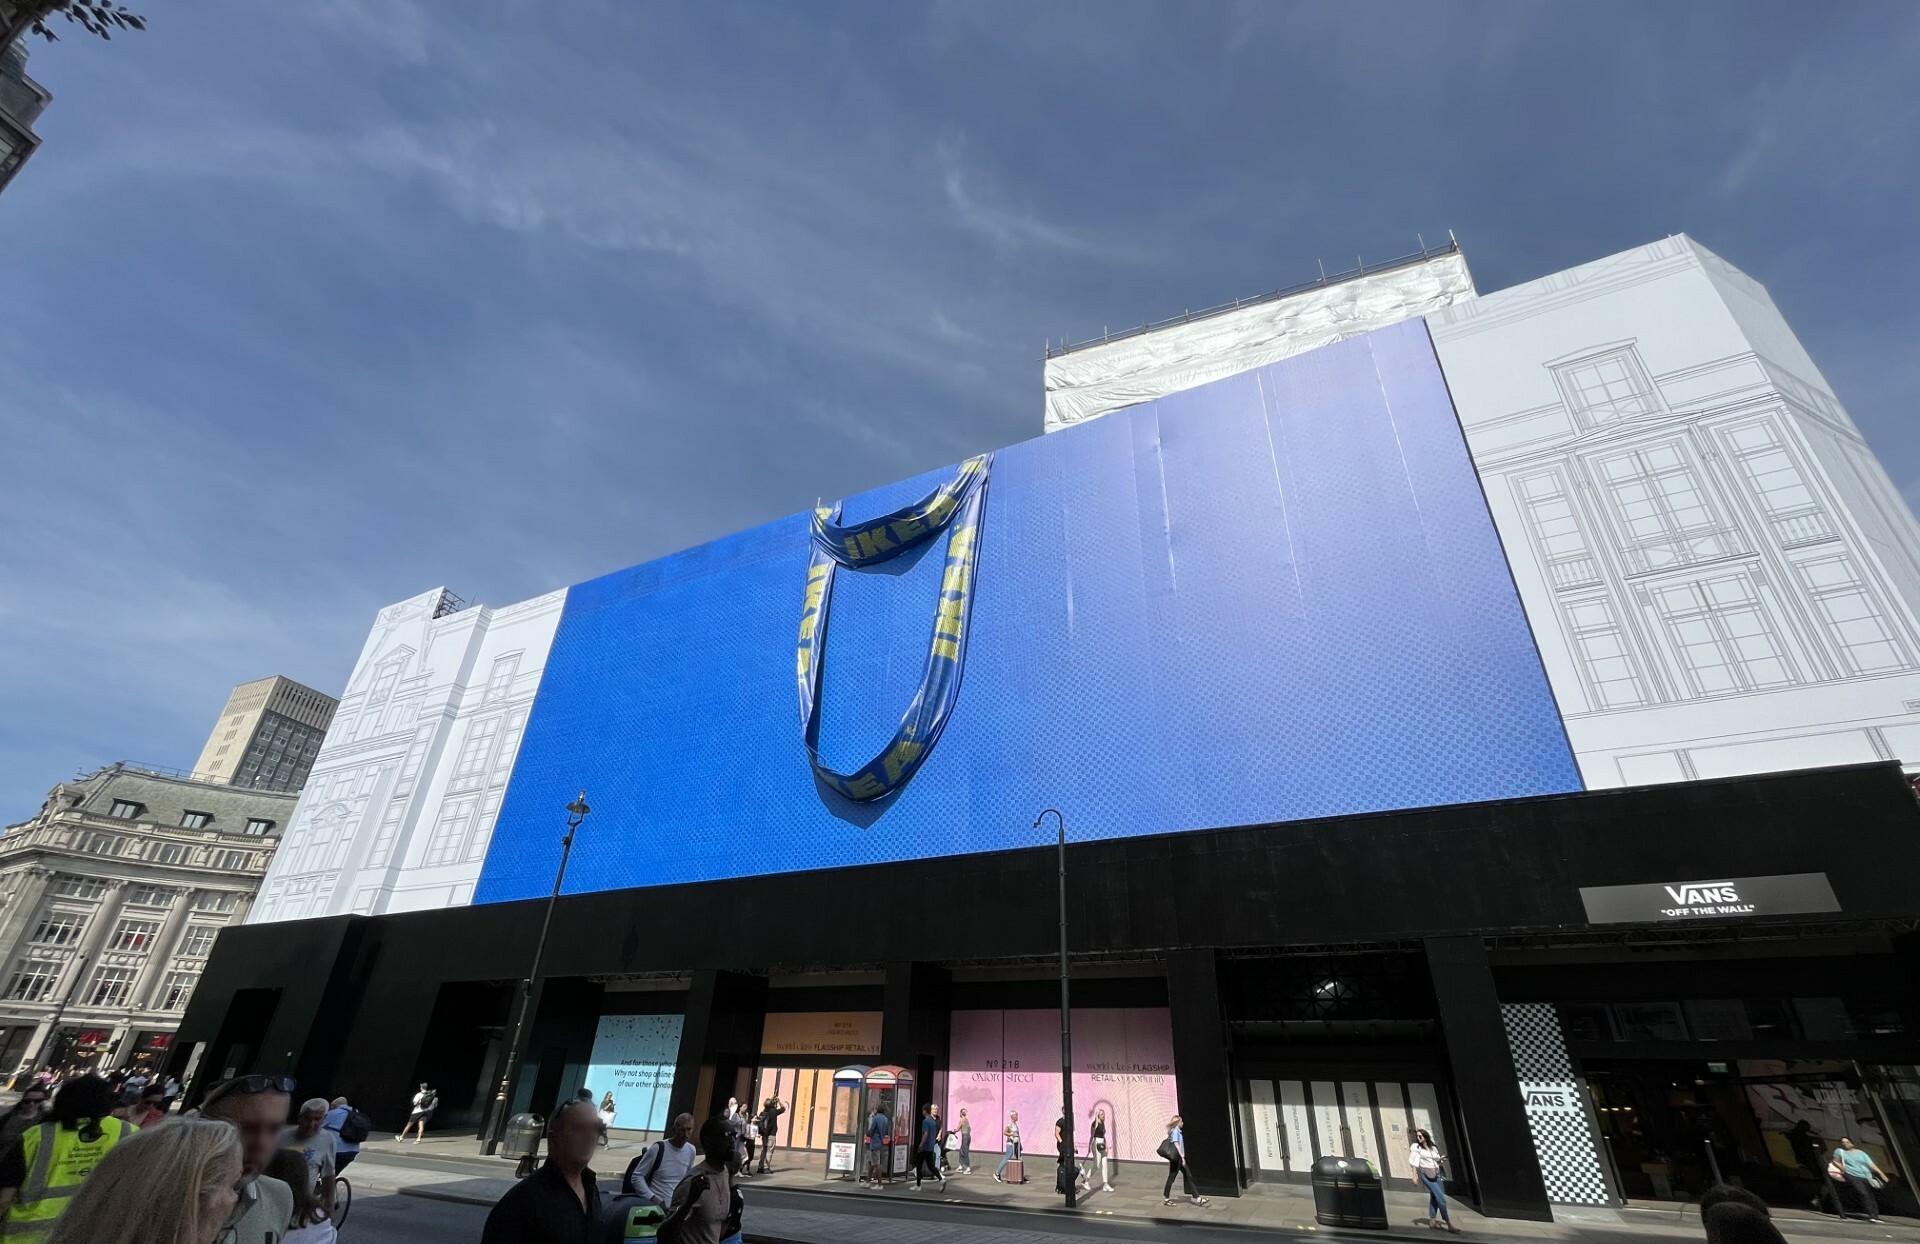 what’s-going-on-with-oxford-street’s-massive-new-ikea-store?